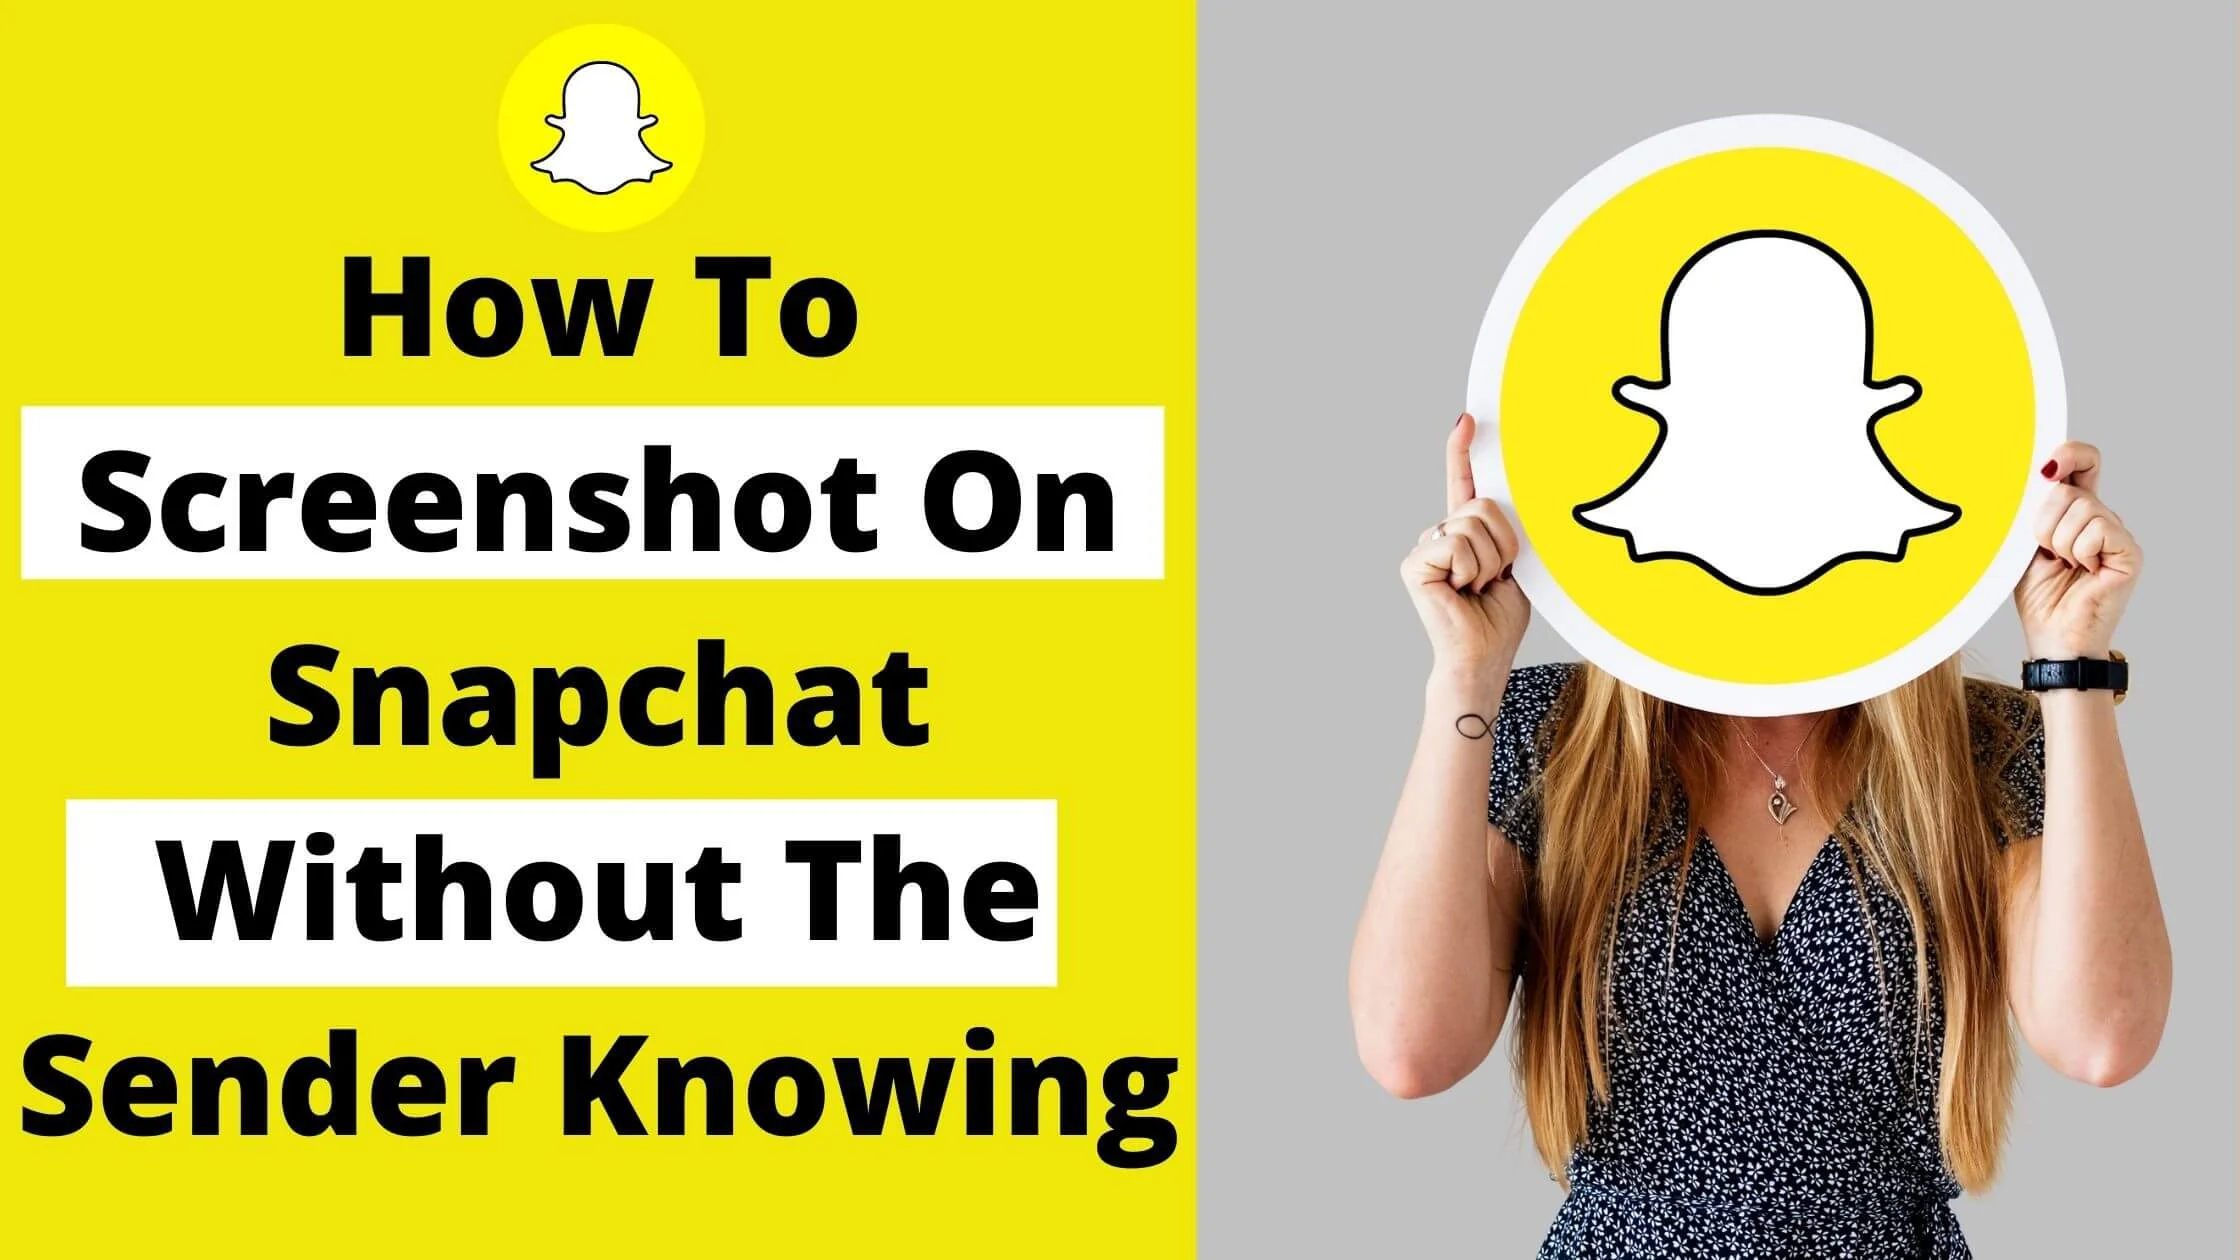 How To Screenshot On Snapchat Without The Sender Knowing